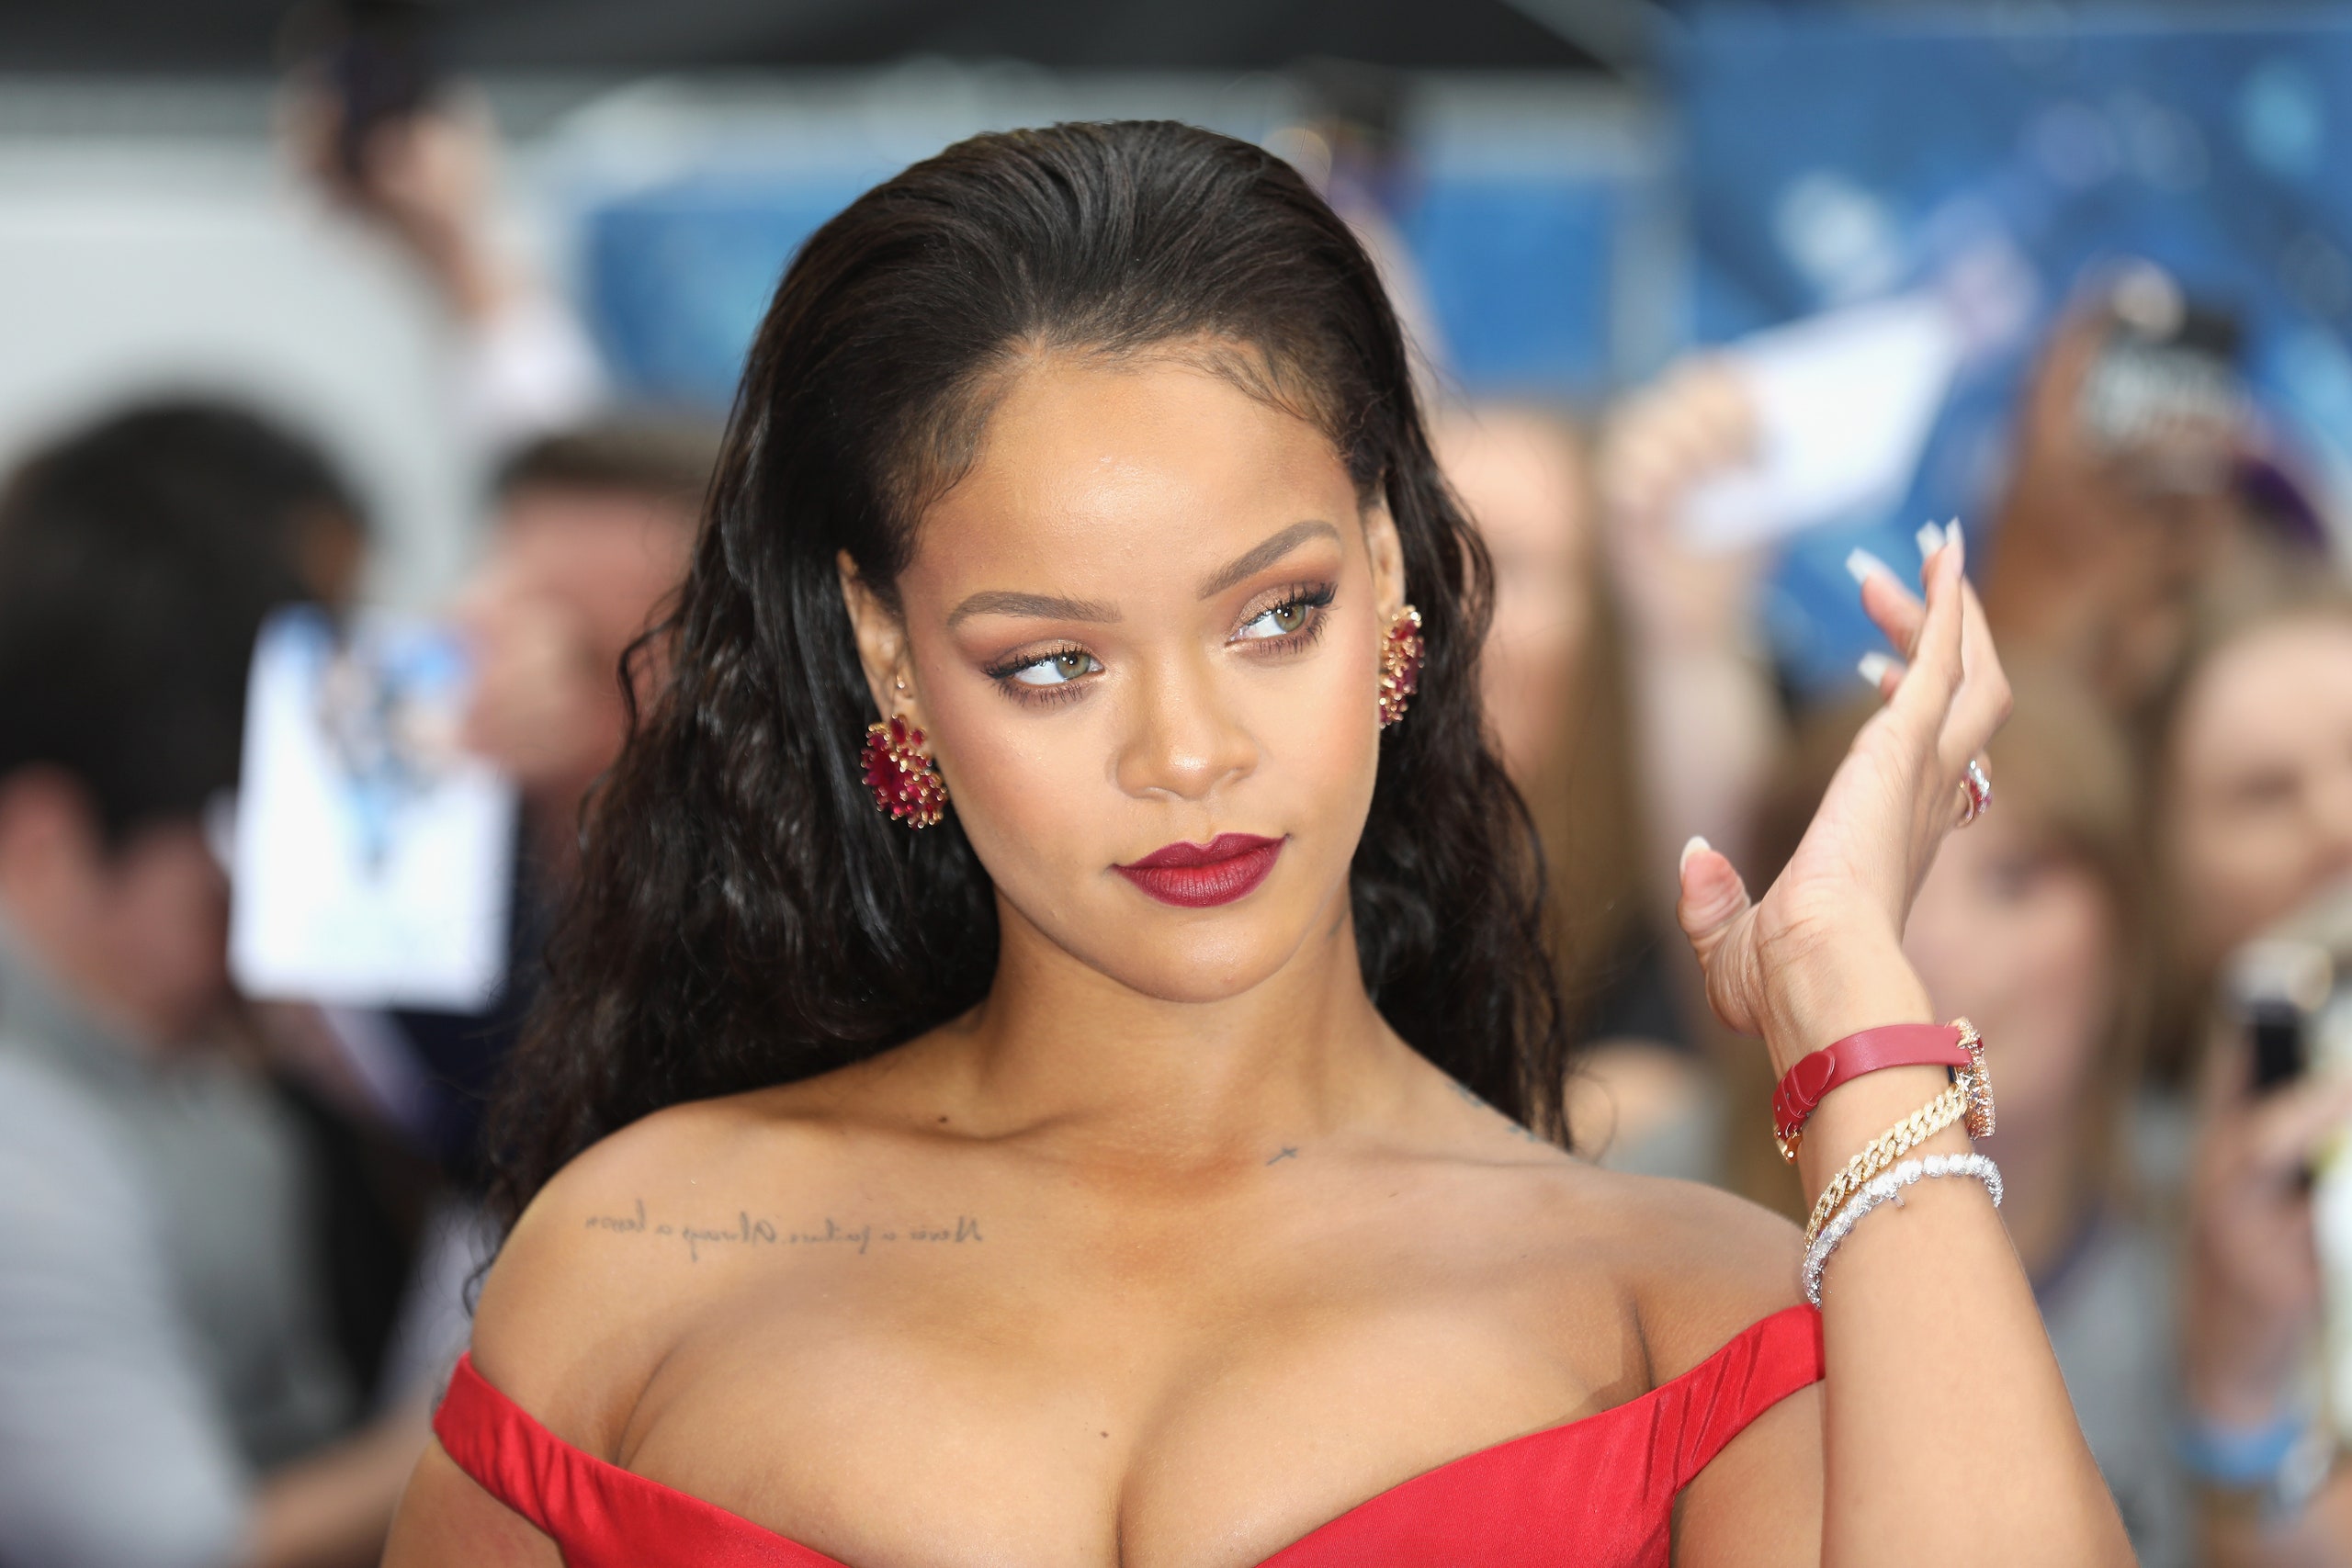 Rihanna ranked #16 on Forbes most powerful women 2021 list